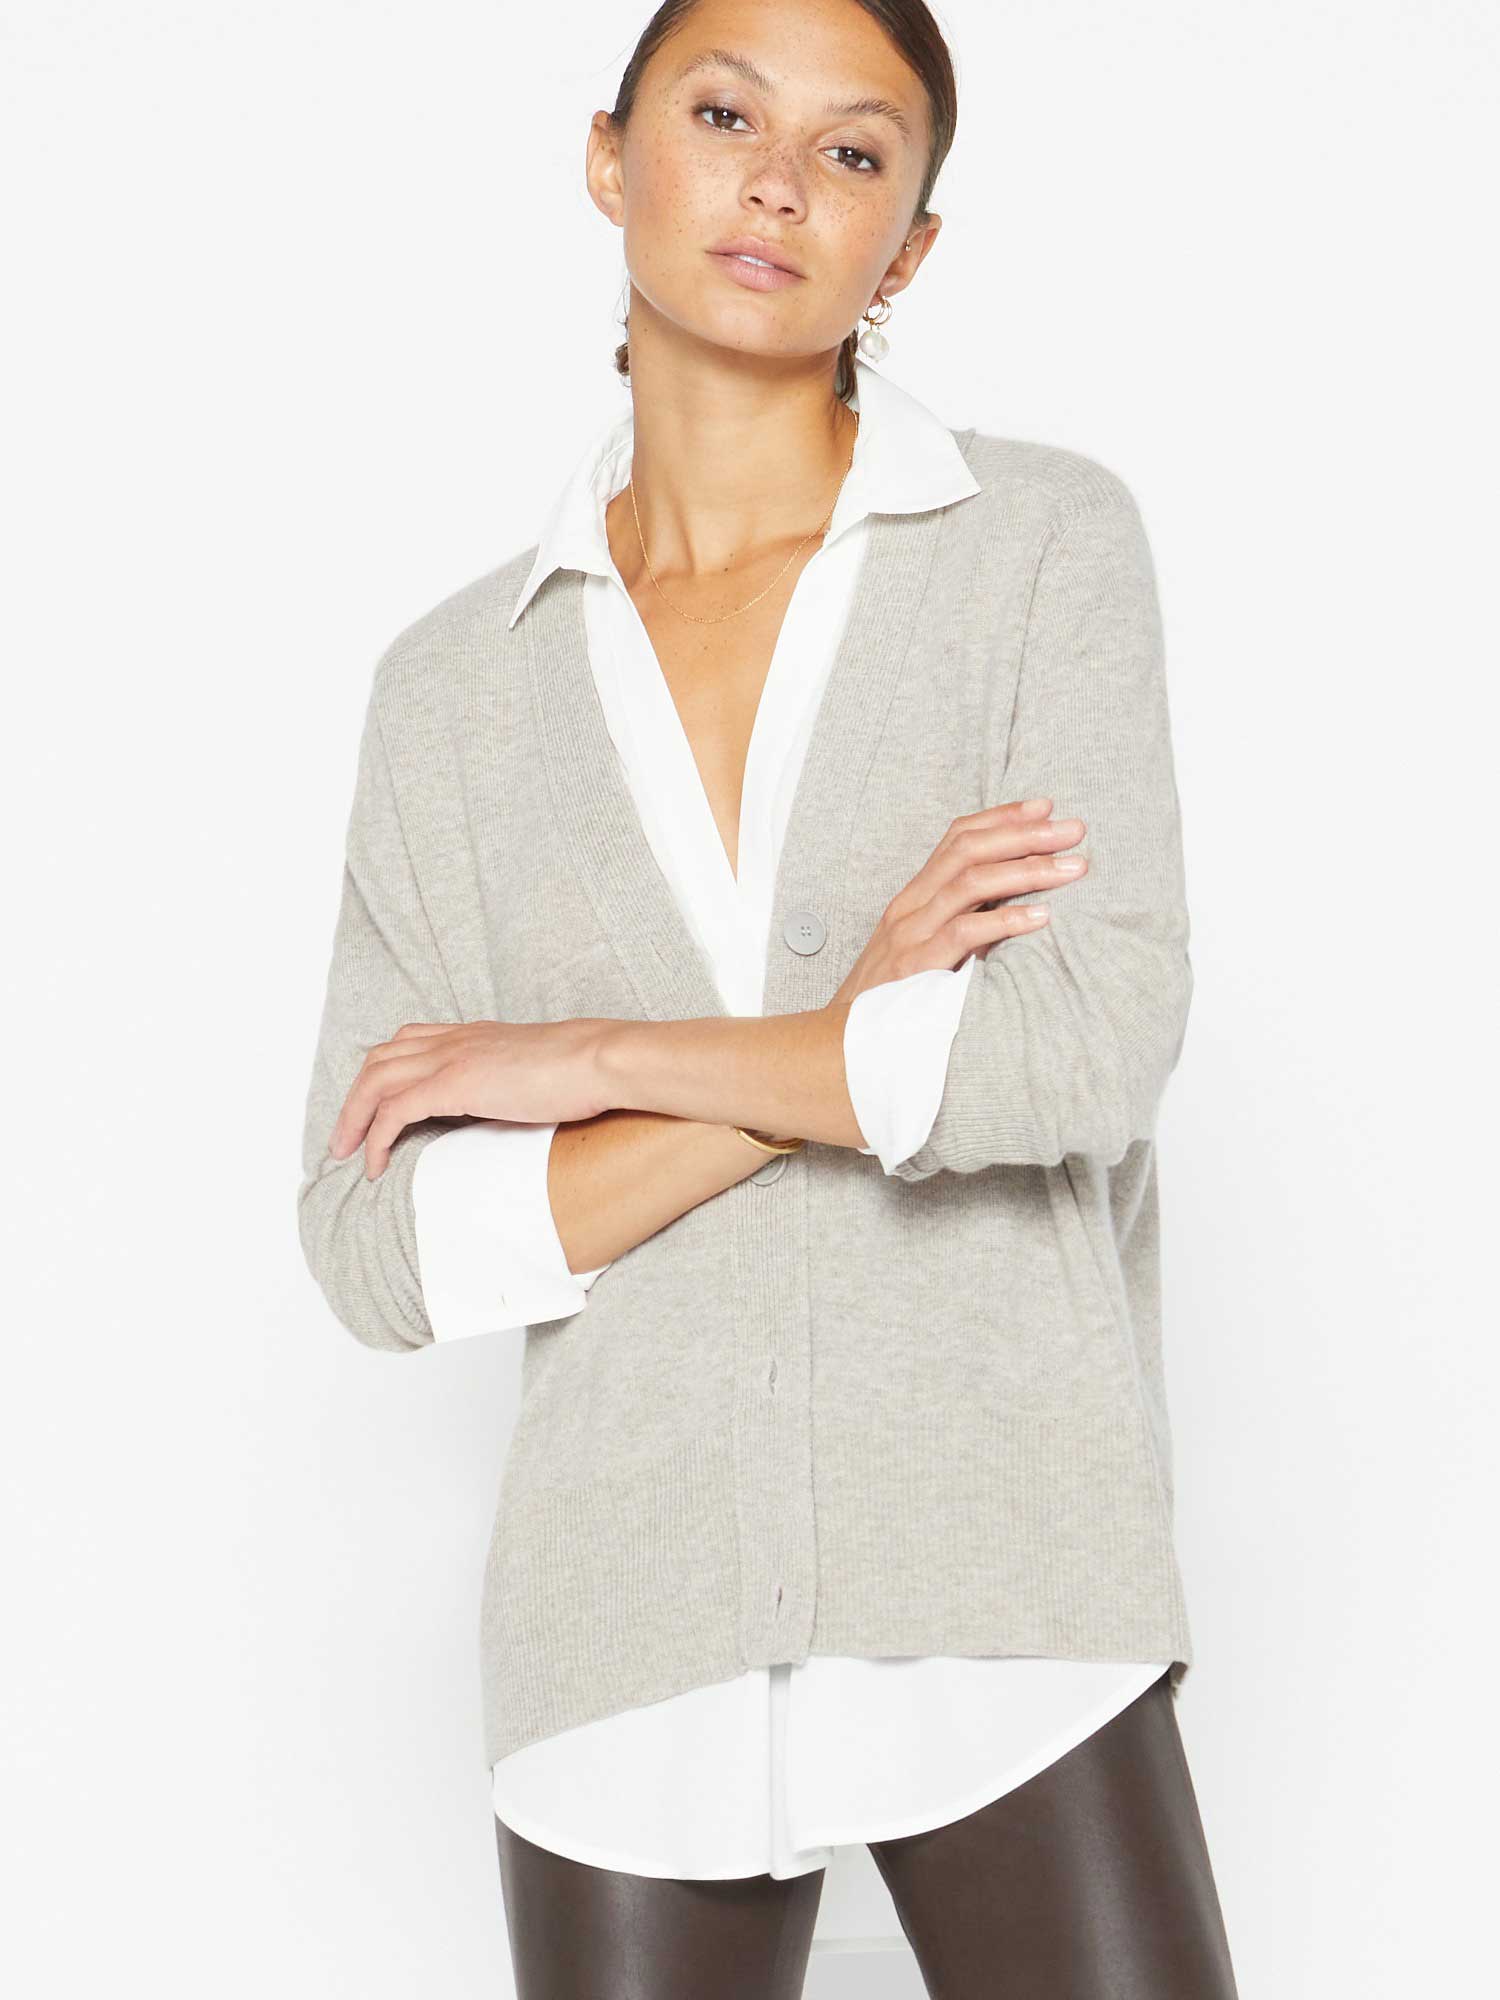 THE CALLIE LAYERED LOOKER CARDIGAN